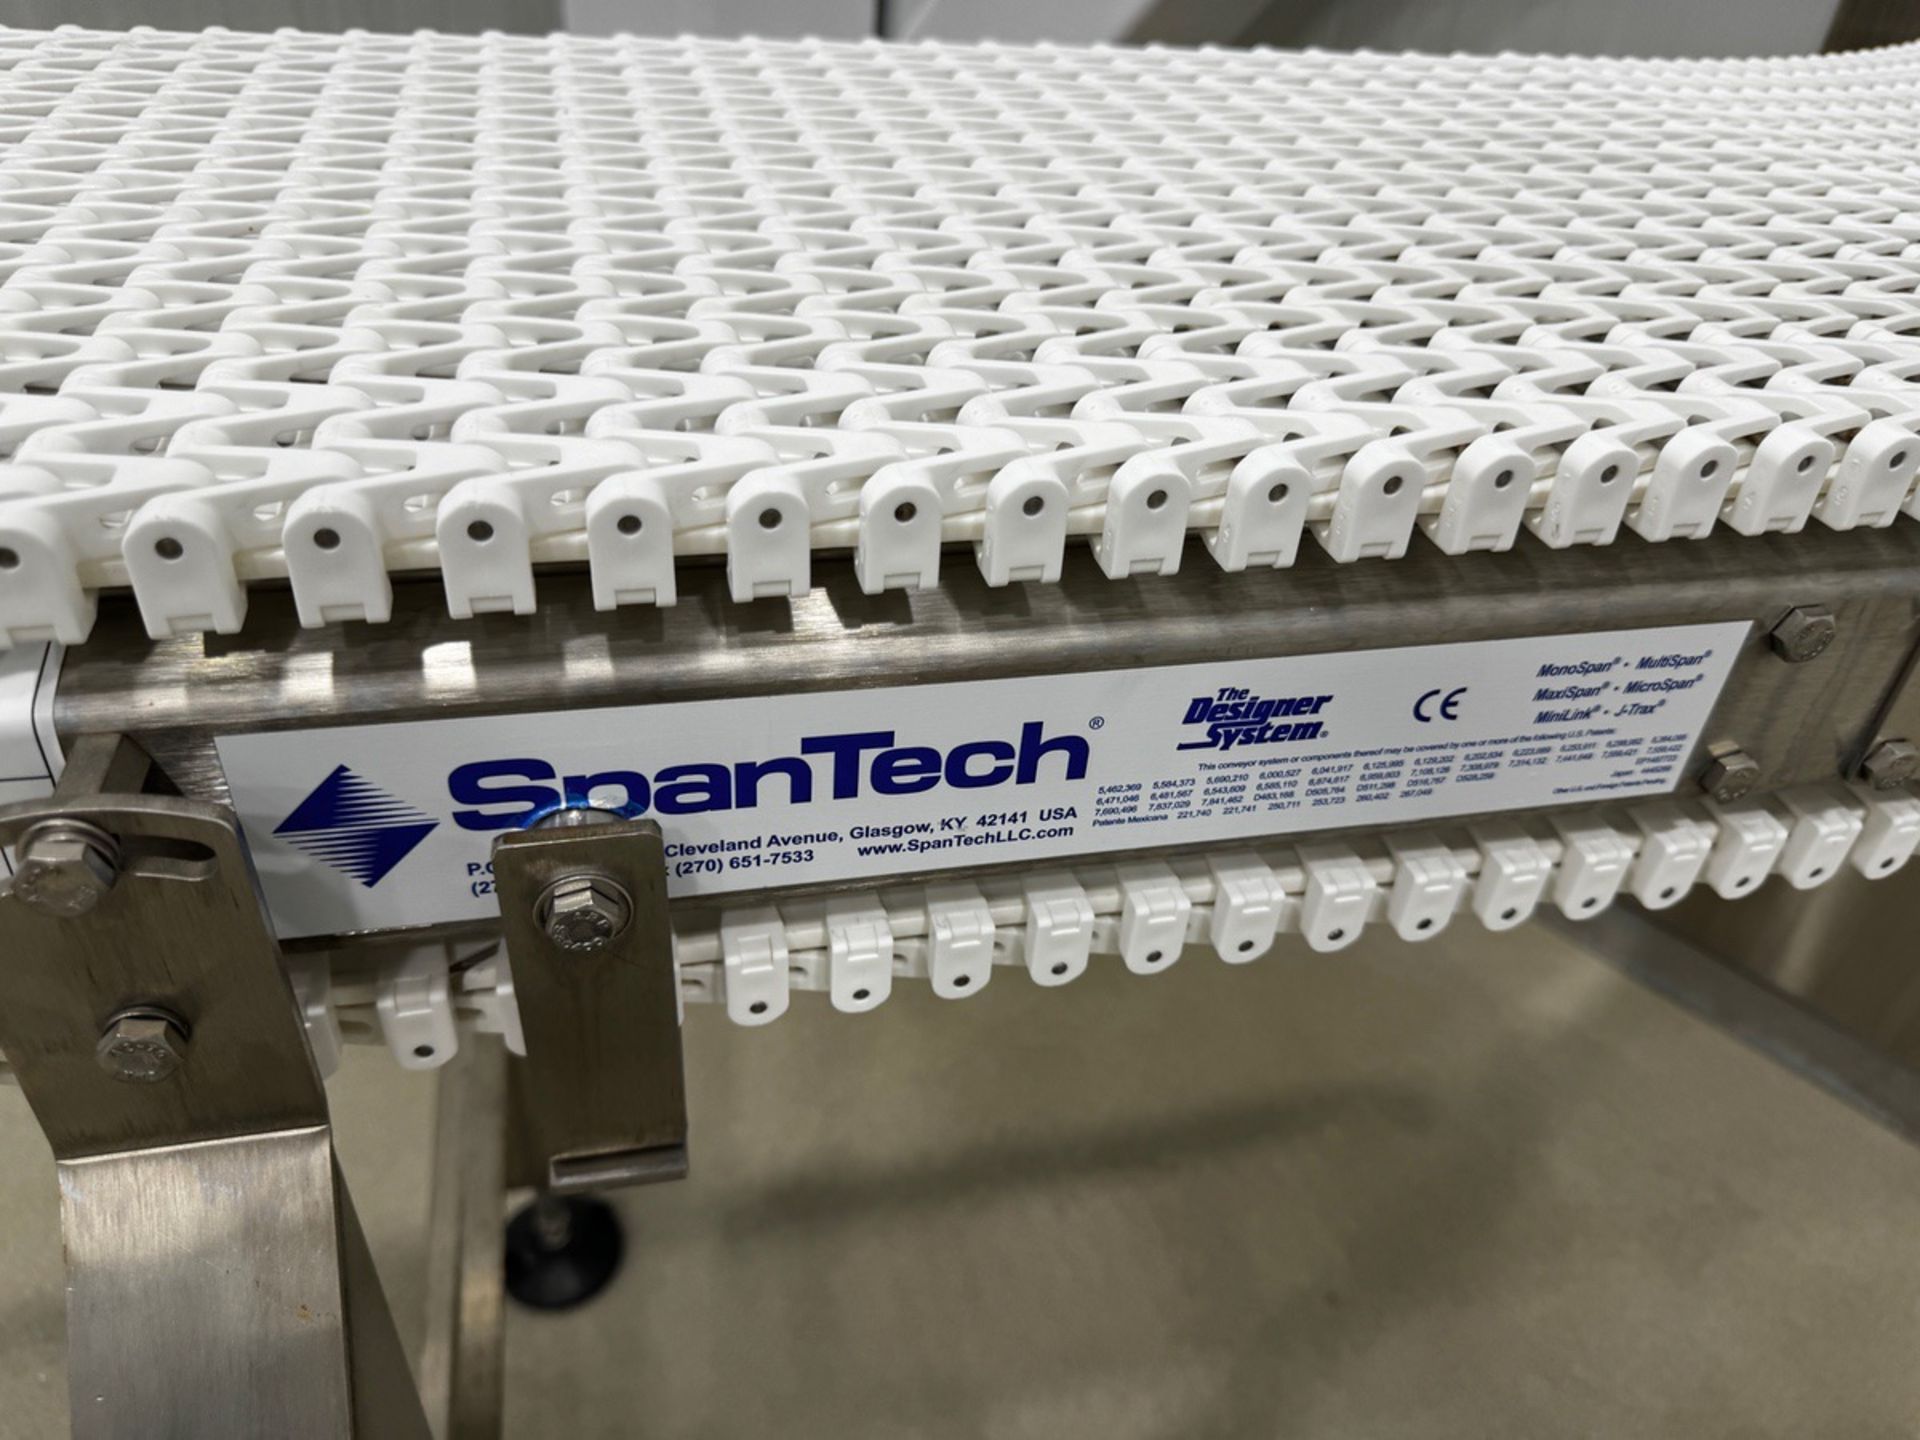 SpanTech Stainless Steel Frame Conveyor, 16" W x 12' OAL | Rig Fee $175 - Image 2 of 3